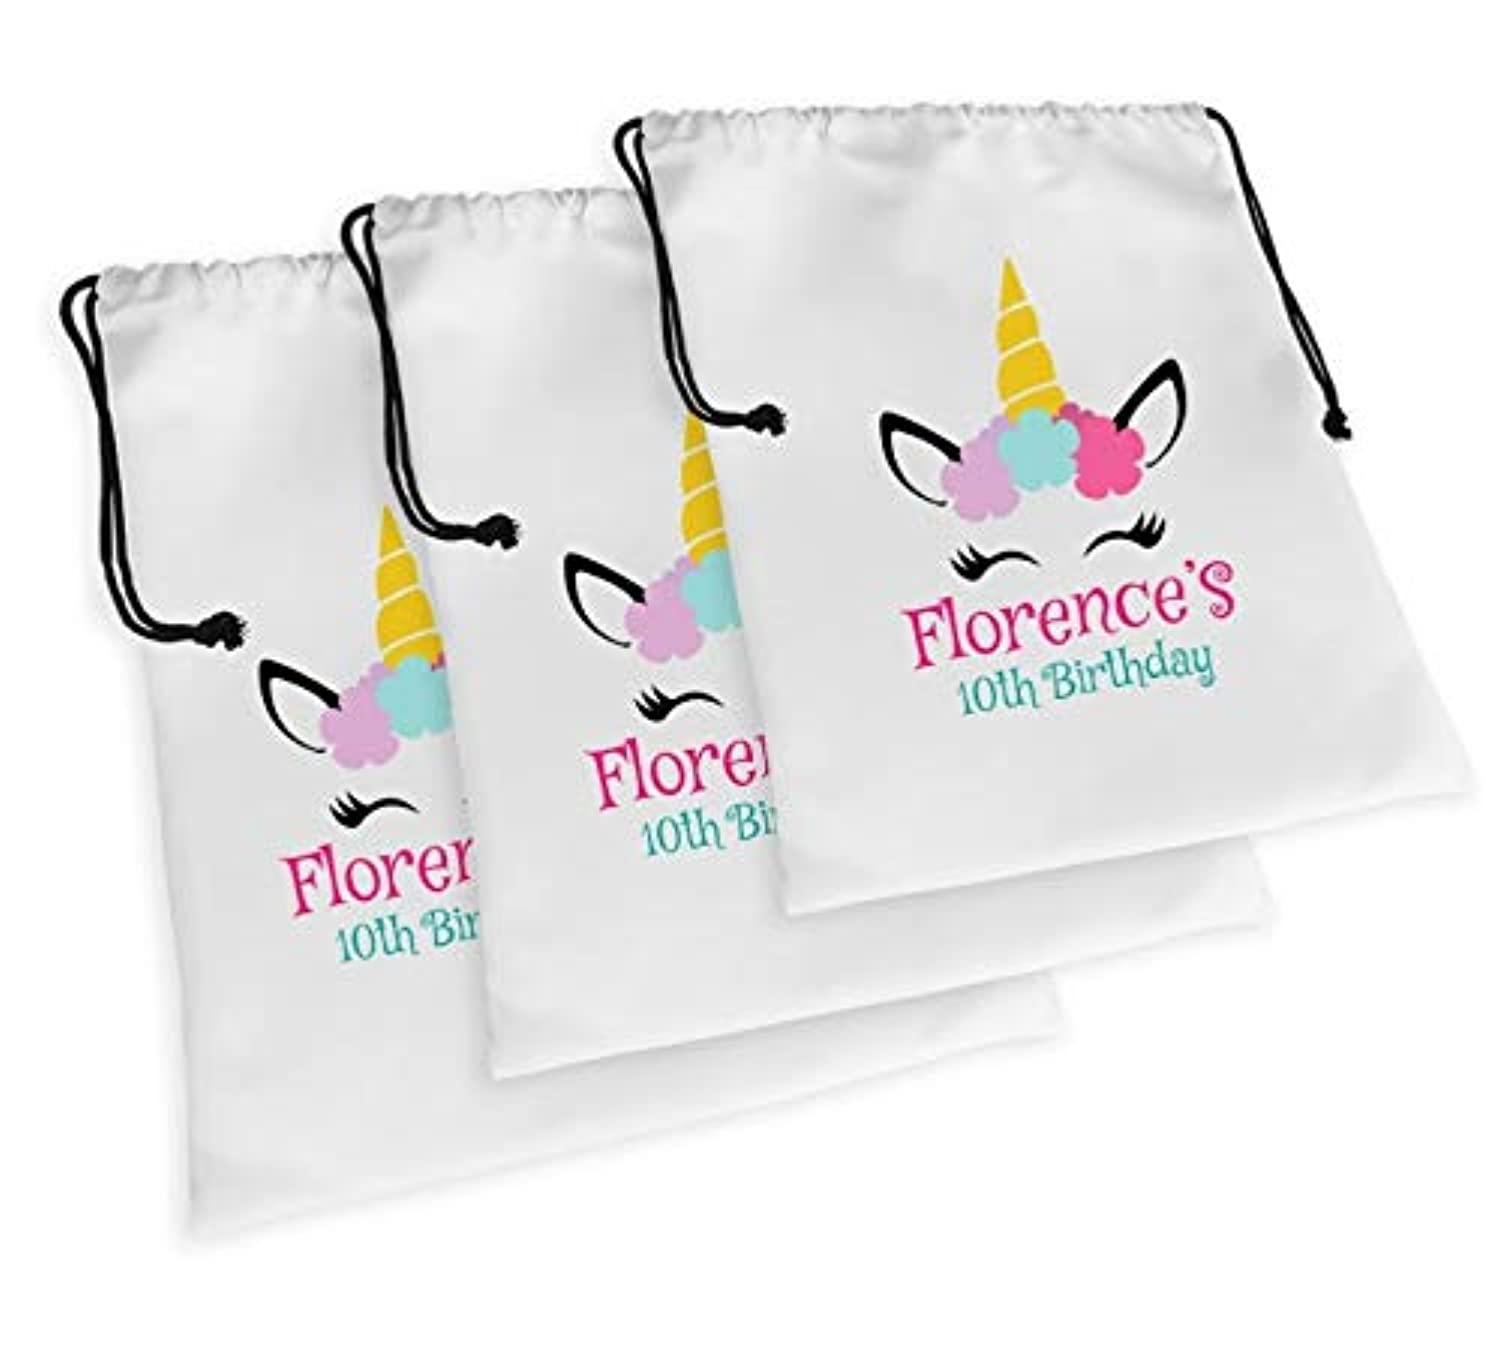 Birthday Party Personalized Goodie Bags